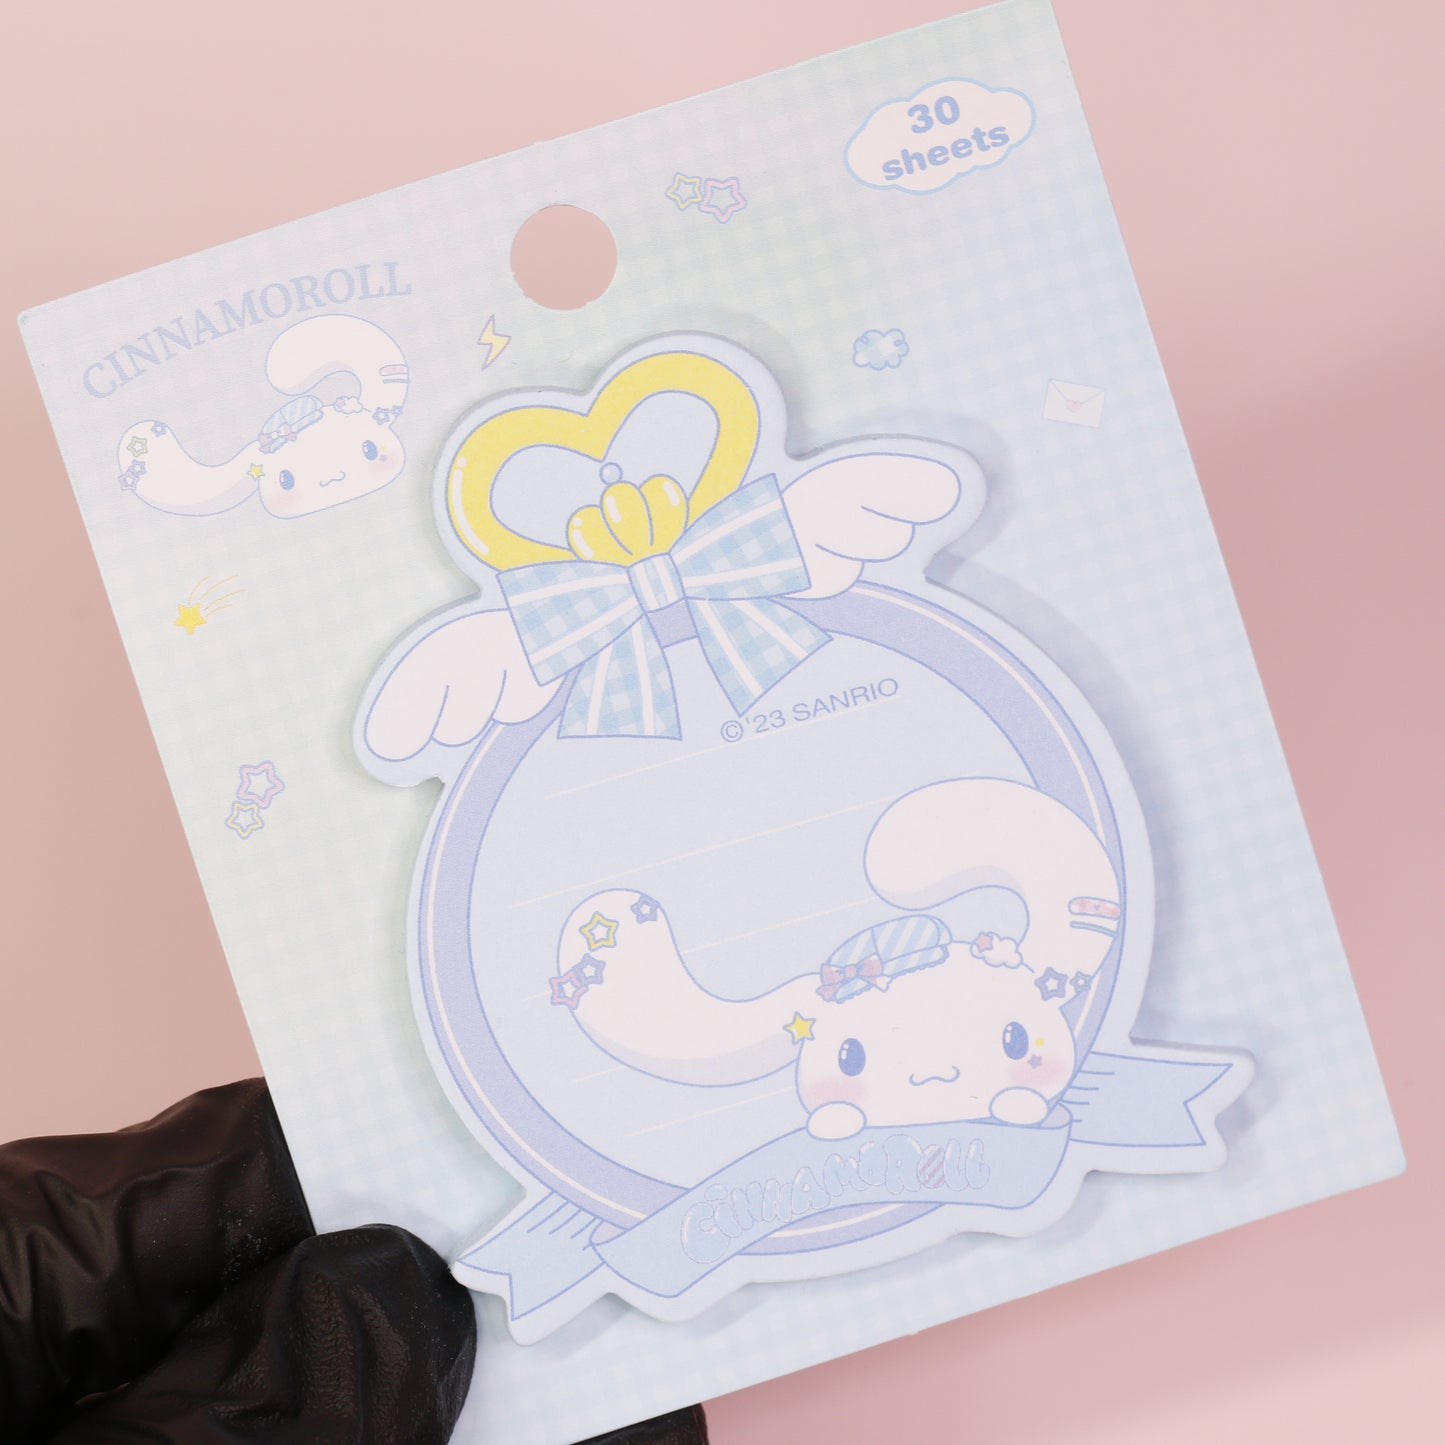 Hazy Dreamy Cinnamoroll Sticky Notes - Adorable Stationery for Memorable Notes